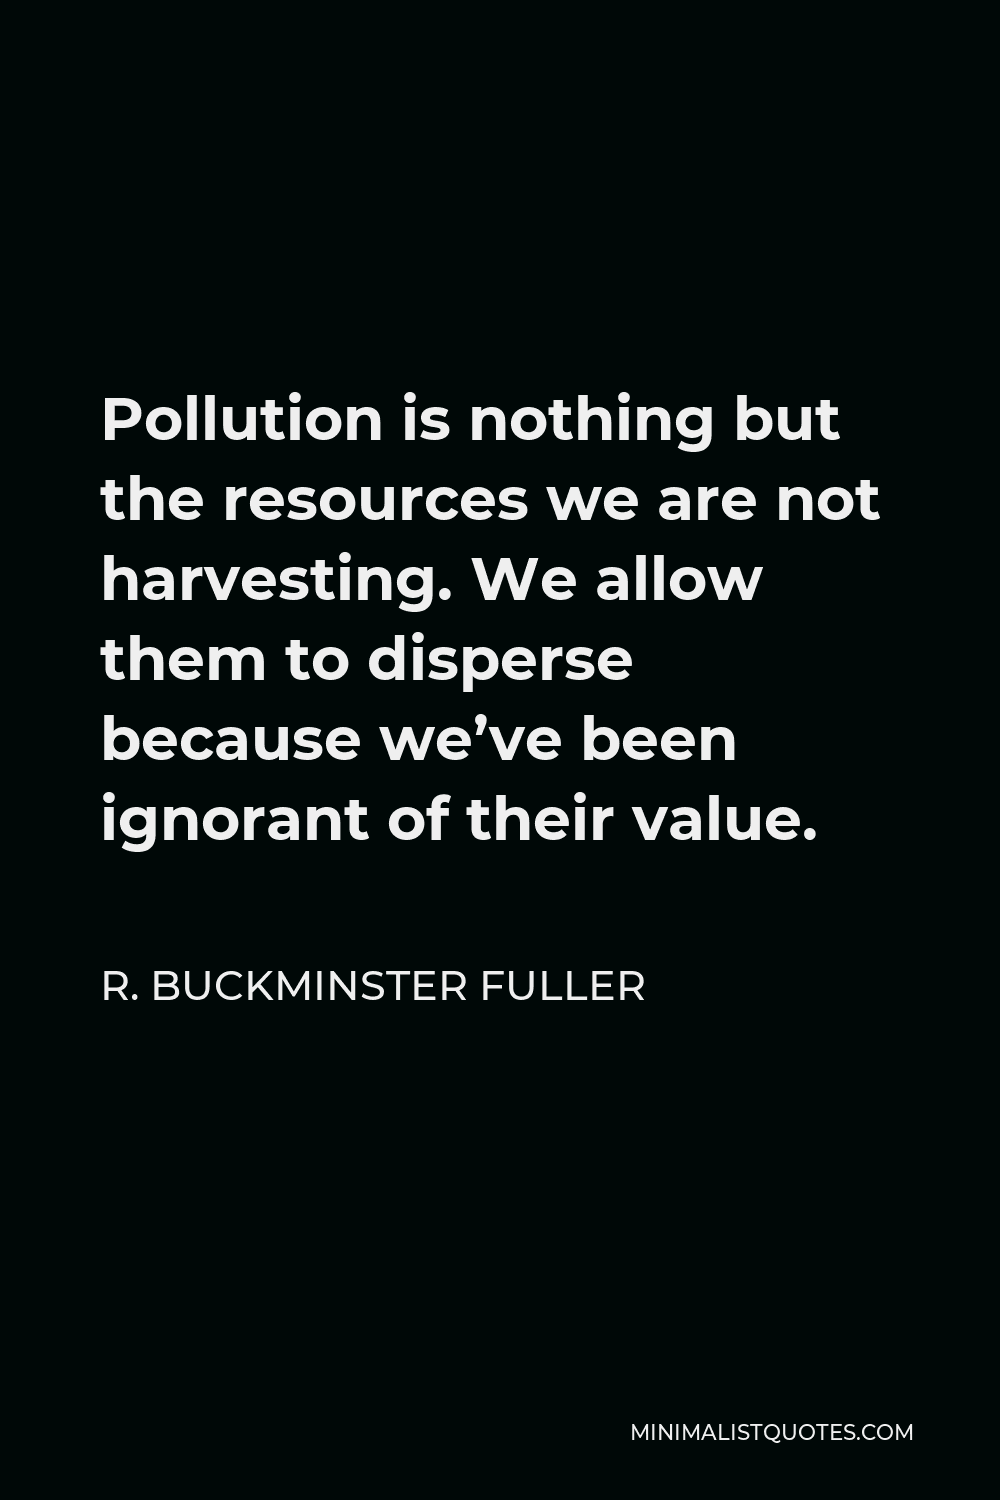 R. Buckminster Fuller Quote - Pollution is nothing but the resources we are not harvesting. We allow them to disperse because we’ve been ignorant of their value.